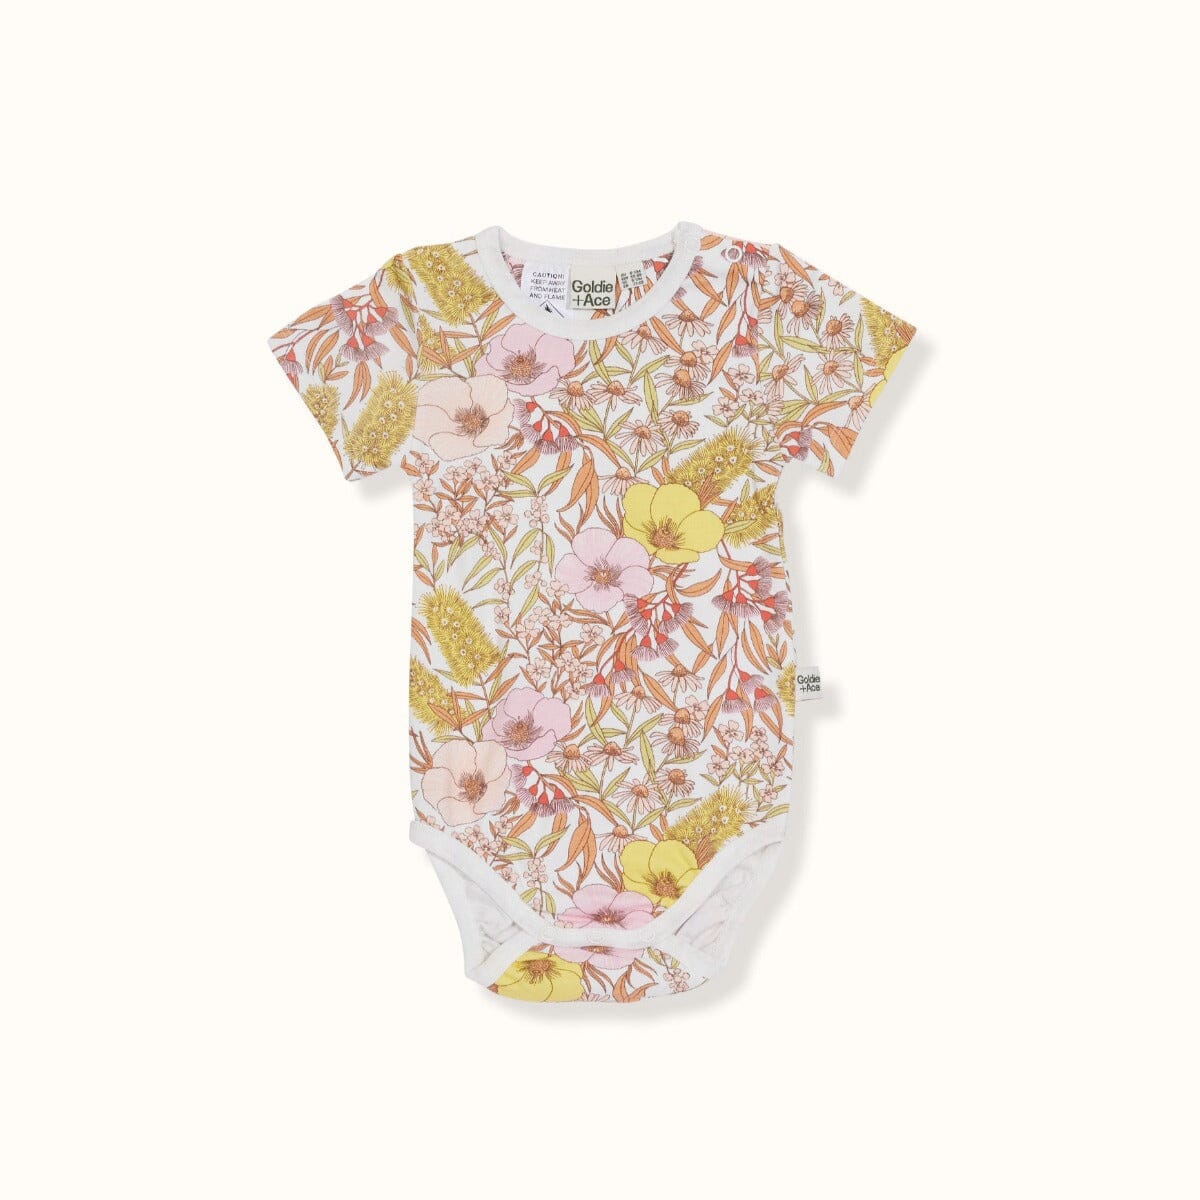 GOLDIE + ACE - On The Bay Print Short Sleeve Bodysuit in Vanilla